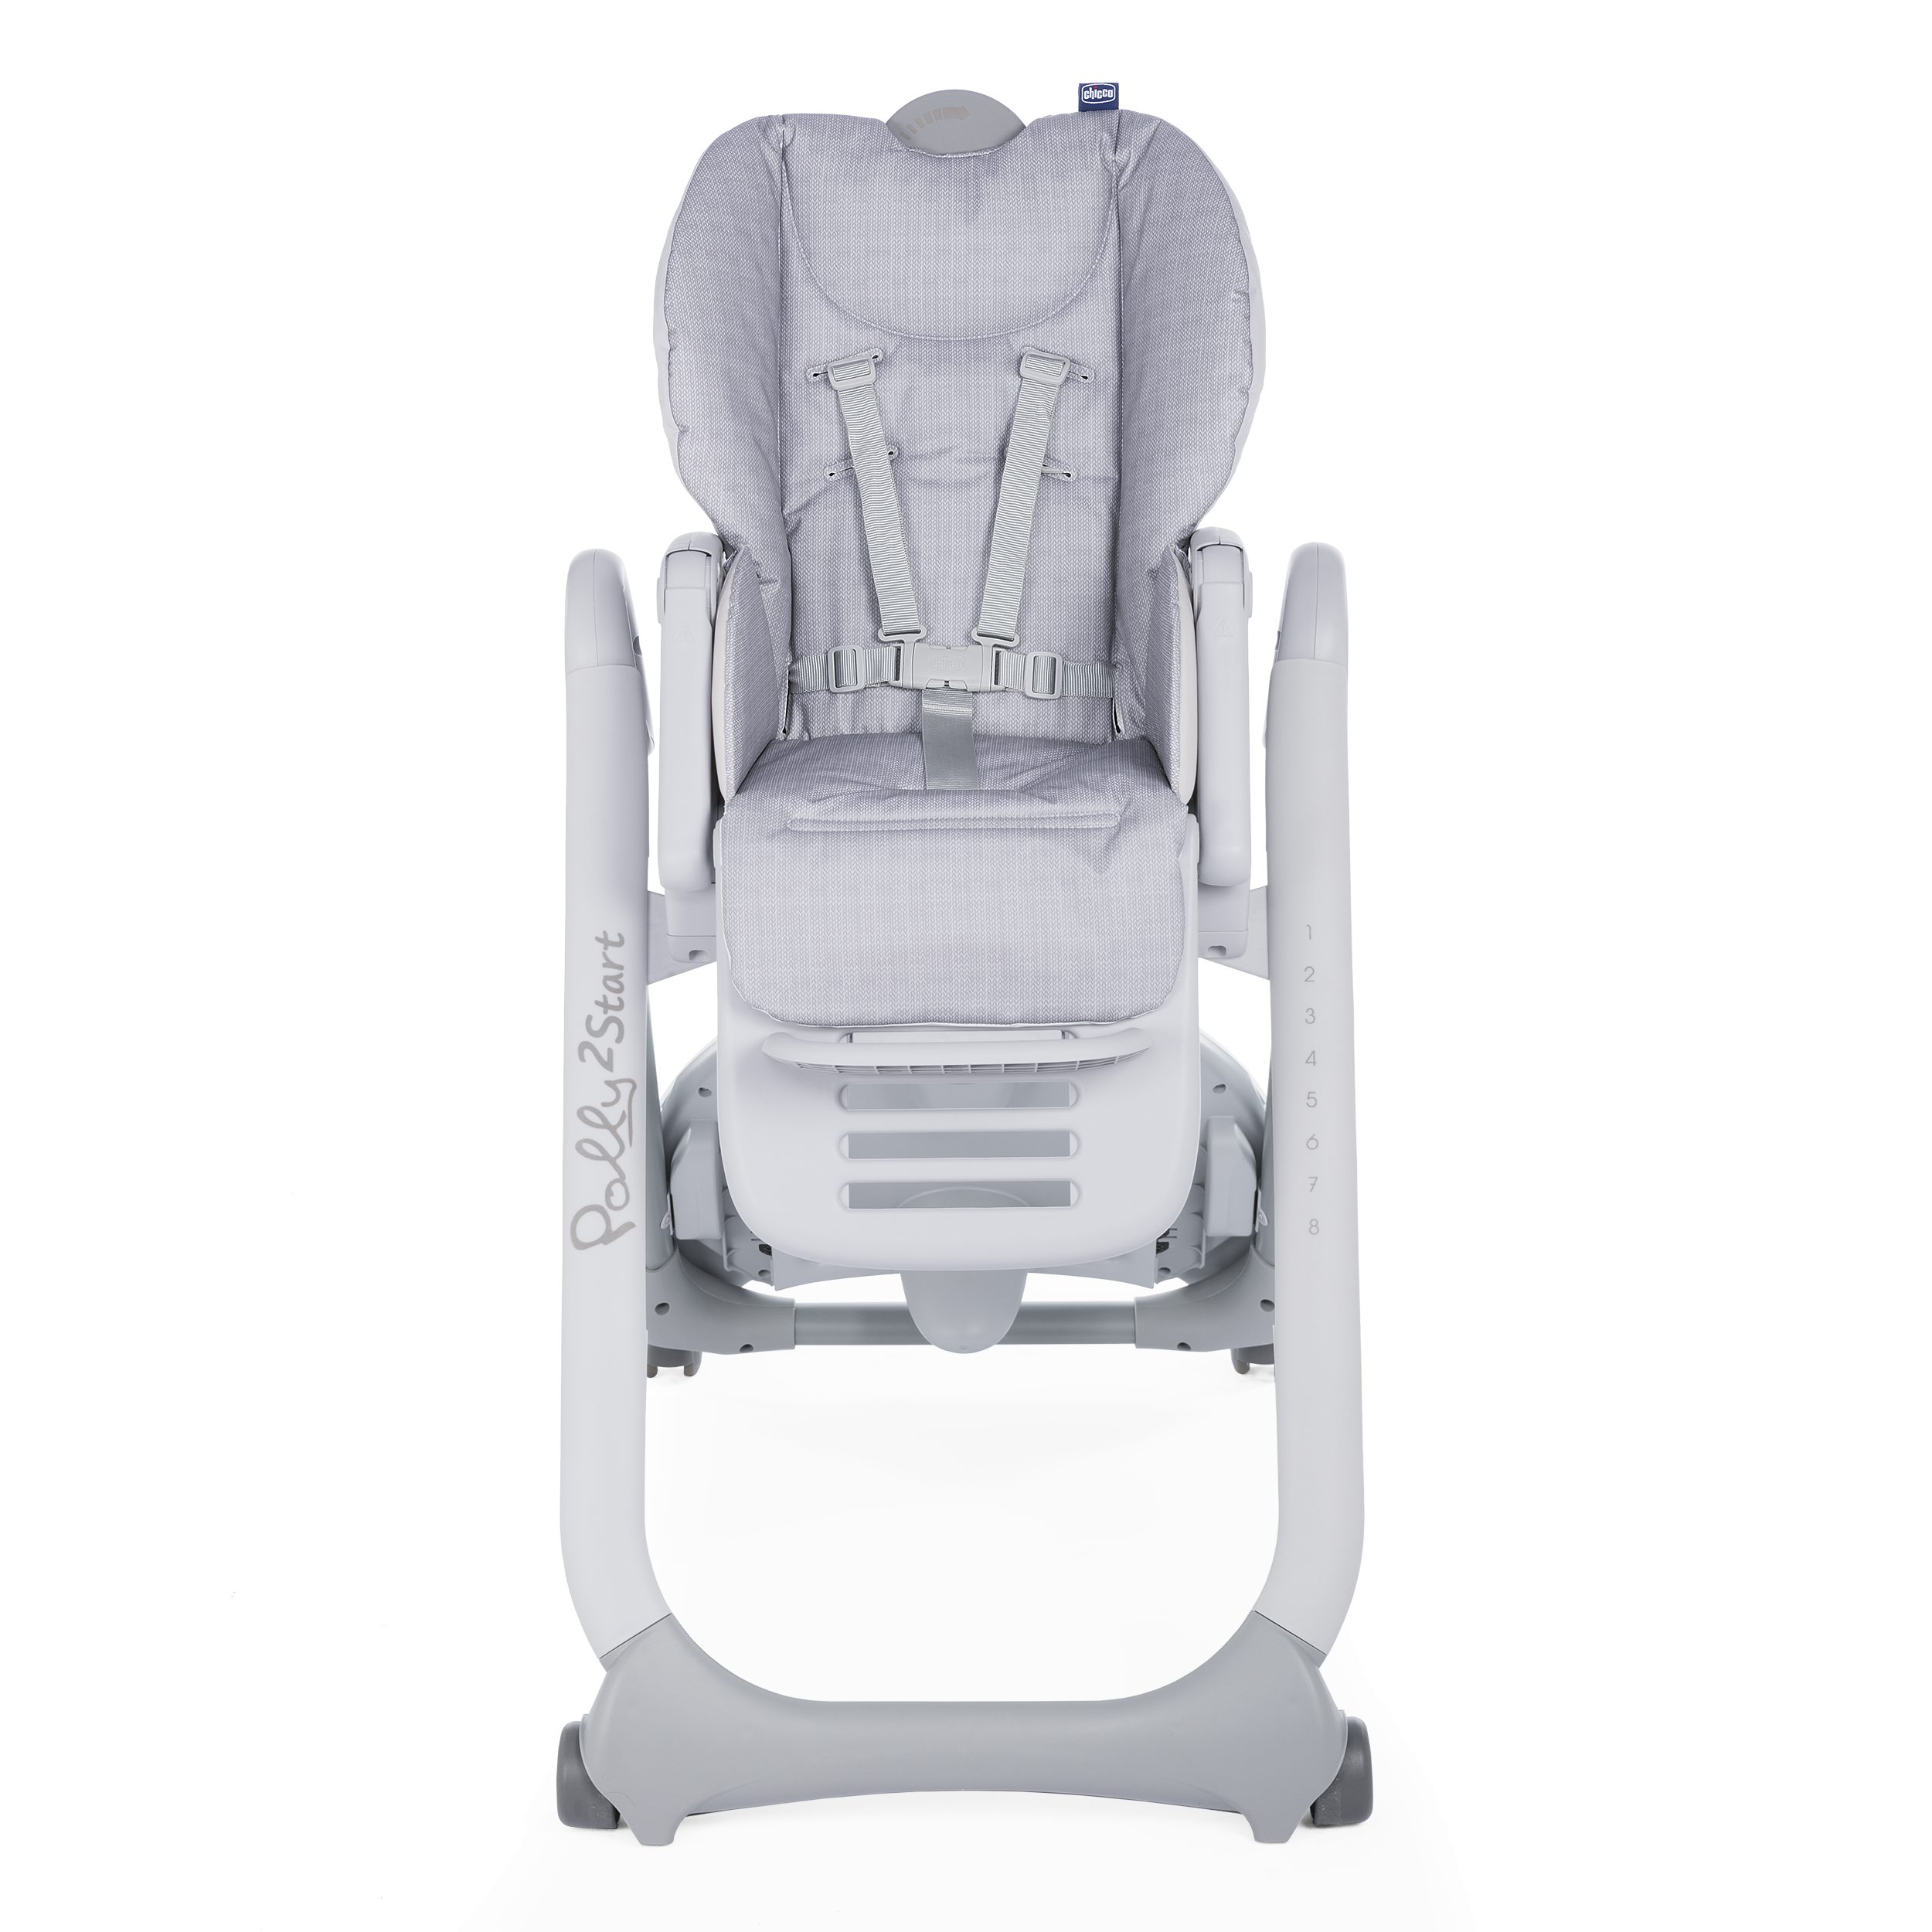 Chaise haute CHICCO Polly2Start - gris clair, Puériculture